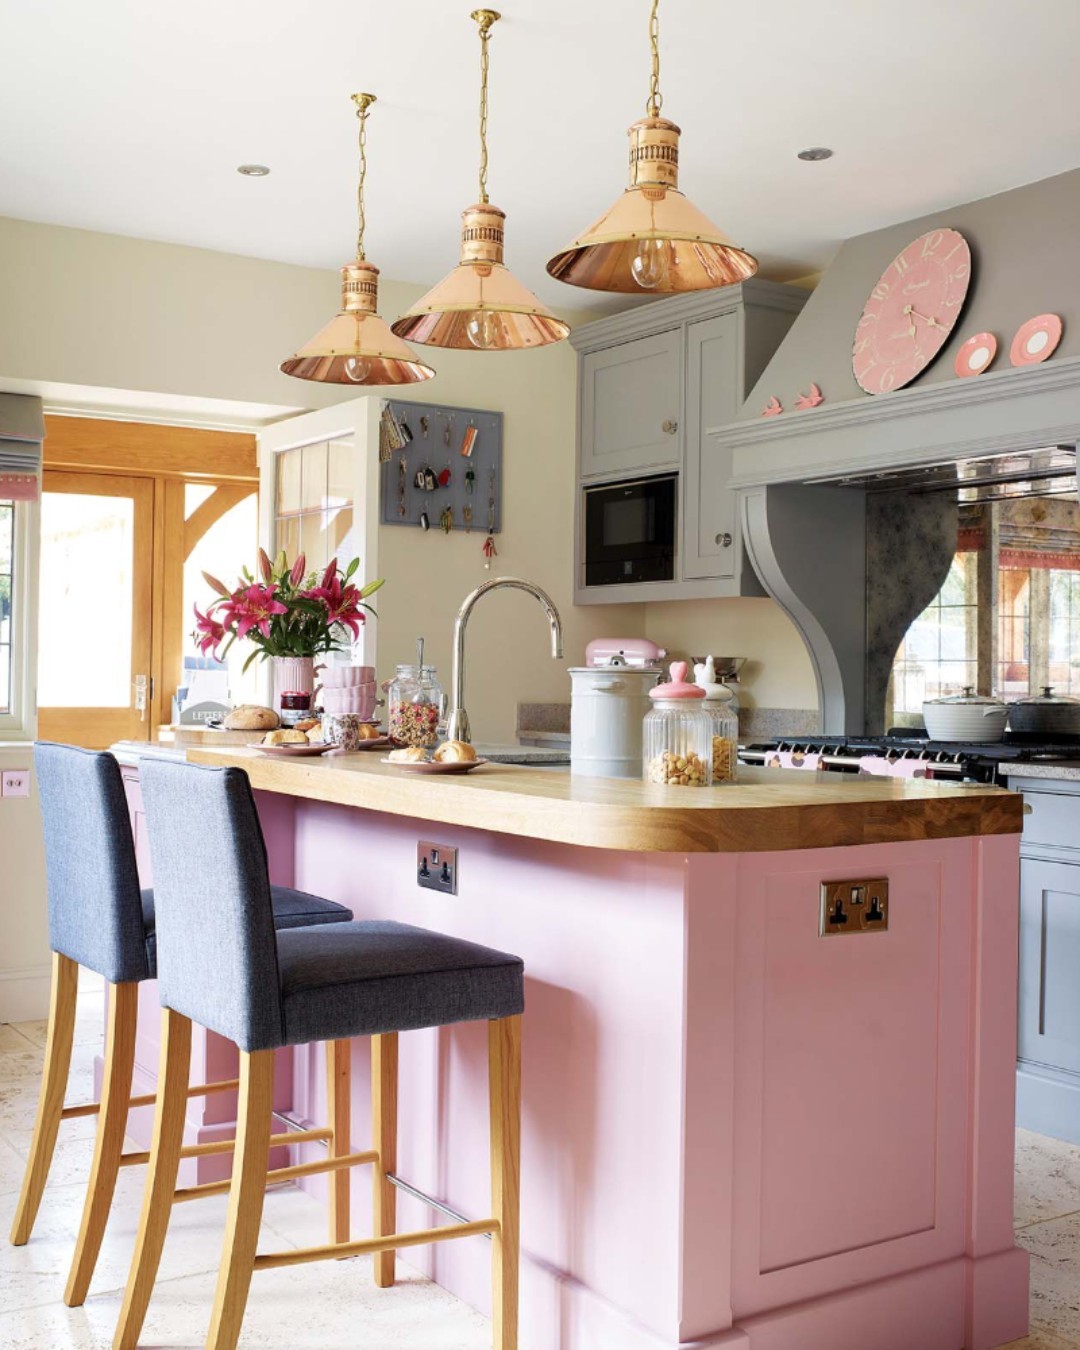 Classic Meets Contemporary in Copper and Pink